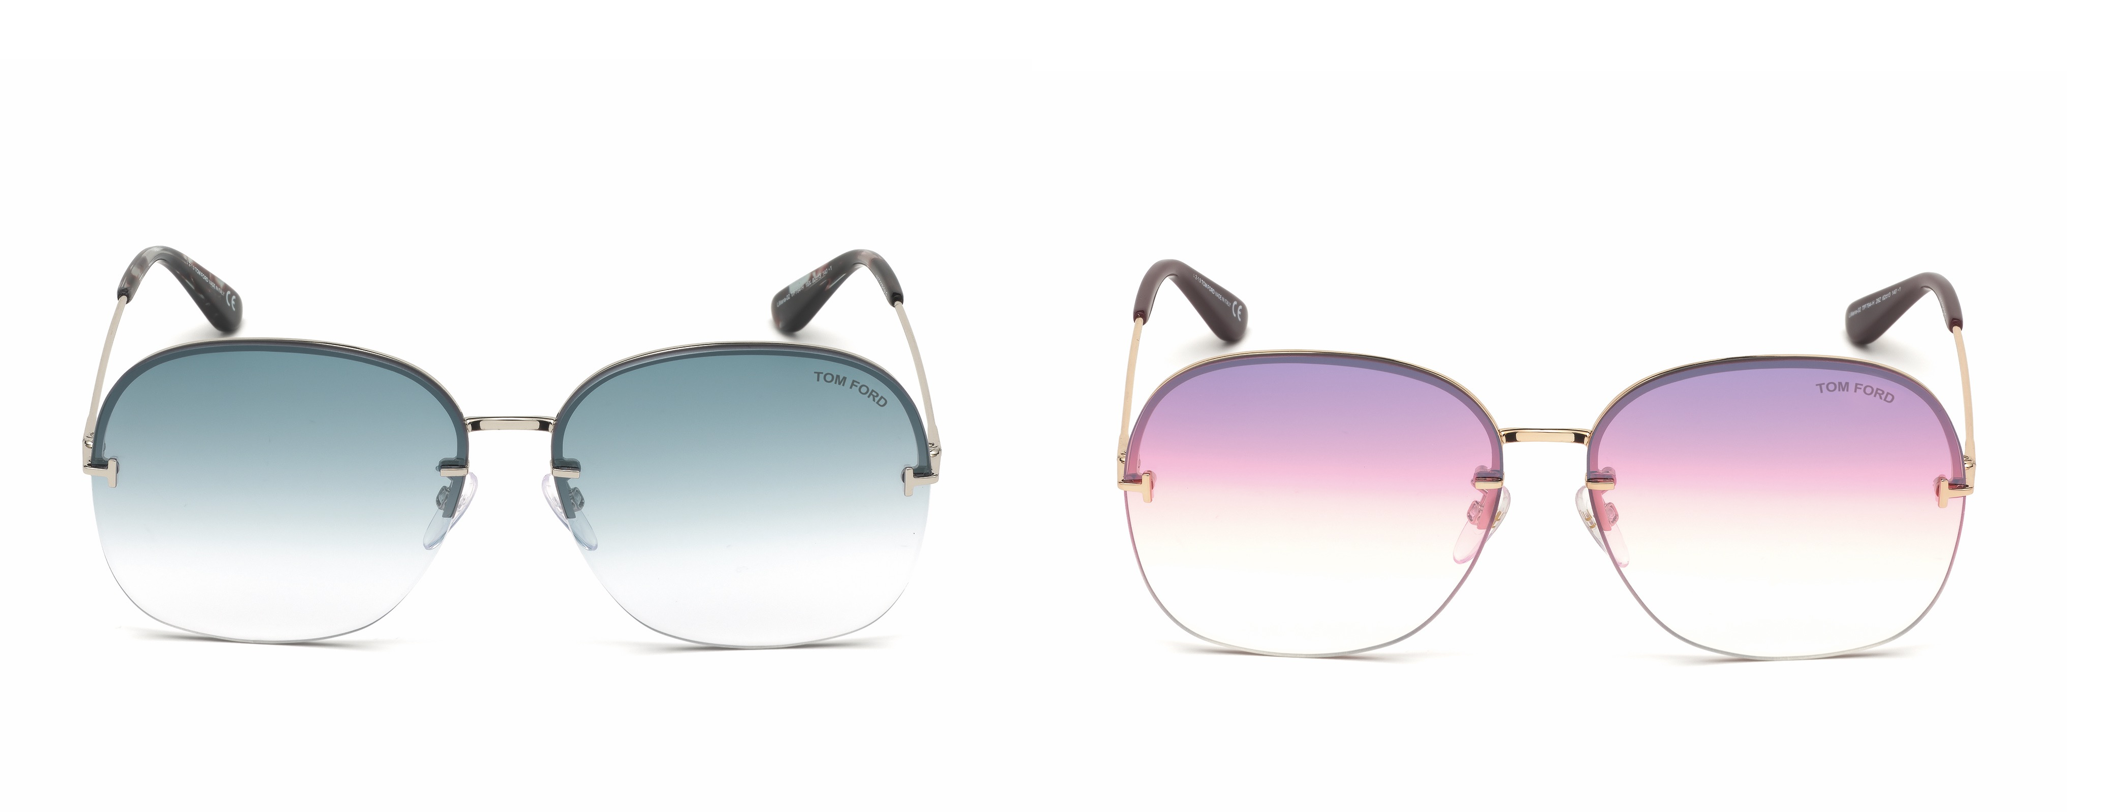 Marcolin Group launches two travel retail exclusive sunglasses from Tom Ford  : The Moodie Davitt Report -The Moodie Davitt Report